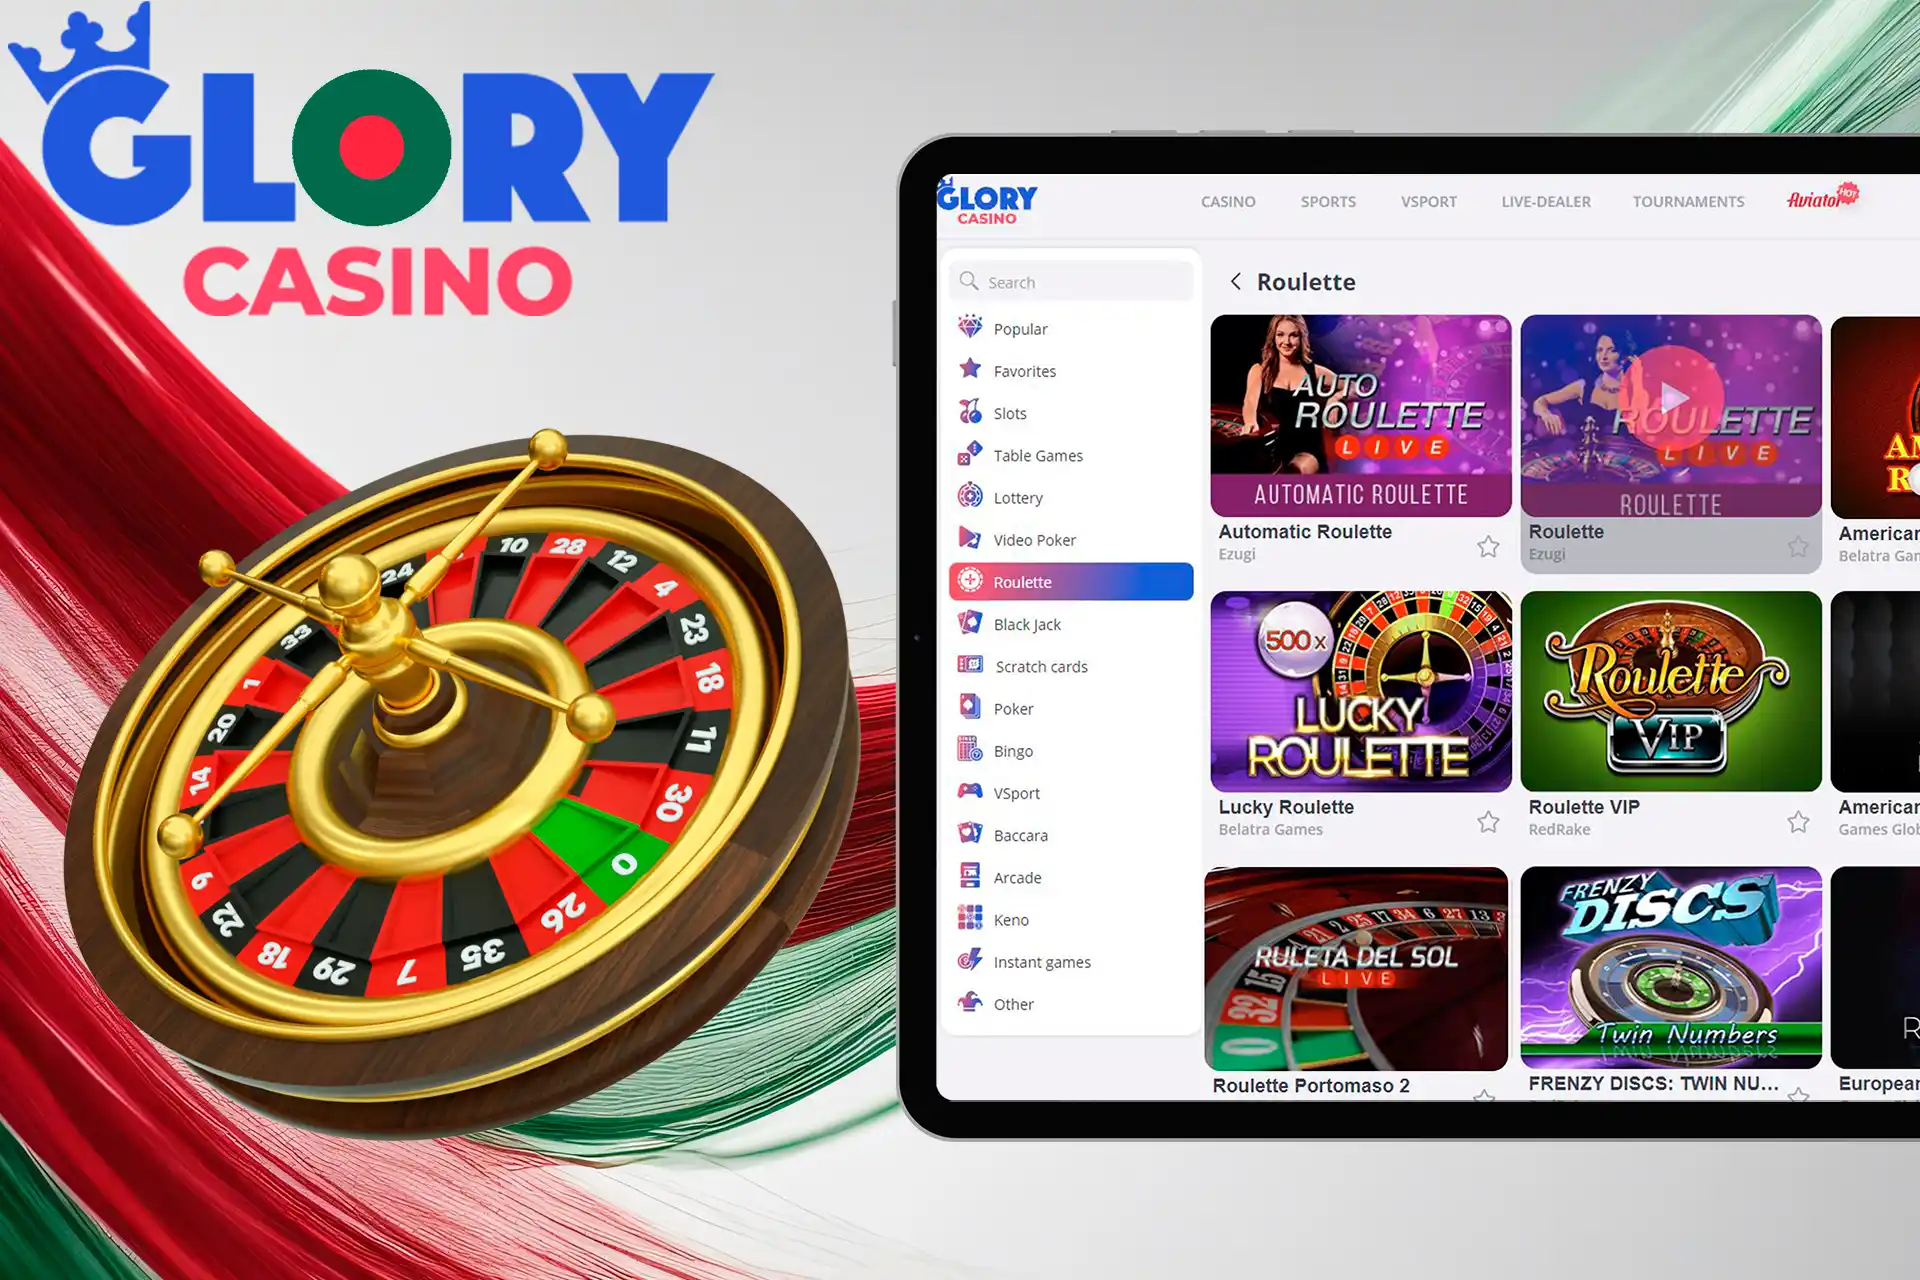 Try your luck playing Roulette at Glory Casino Bangladesh